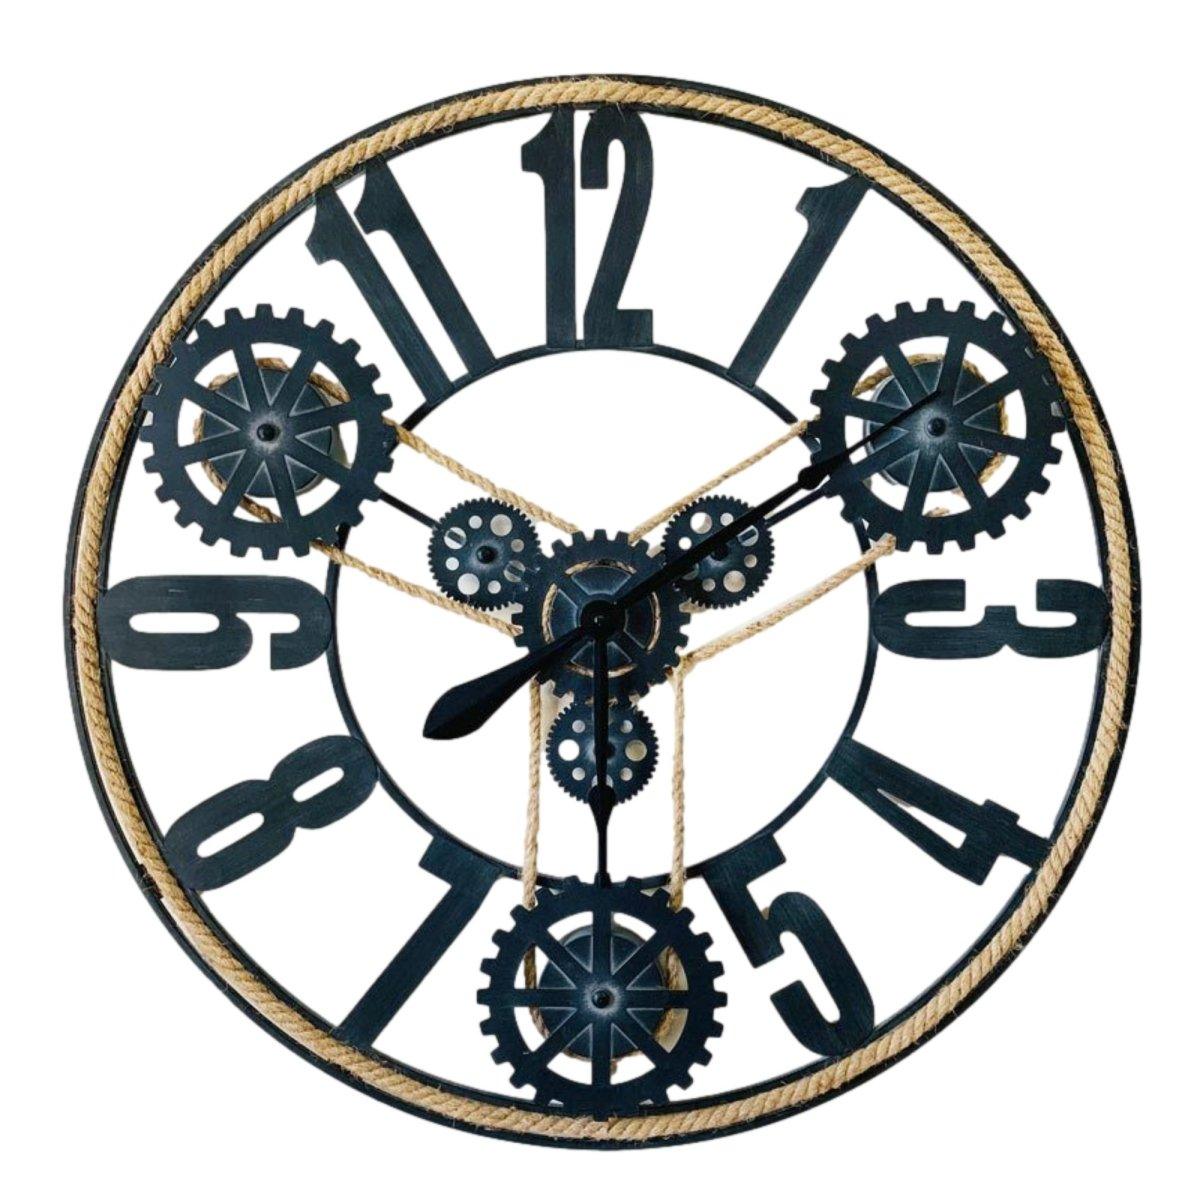 Open Faced Gear Clock - Rustic Furniture Outlet